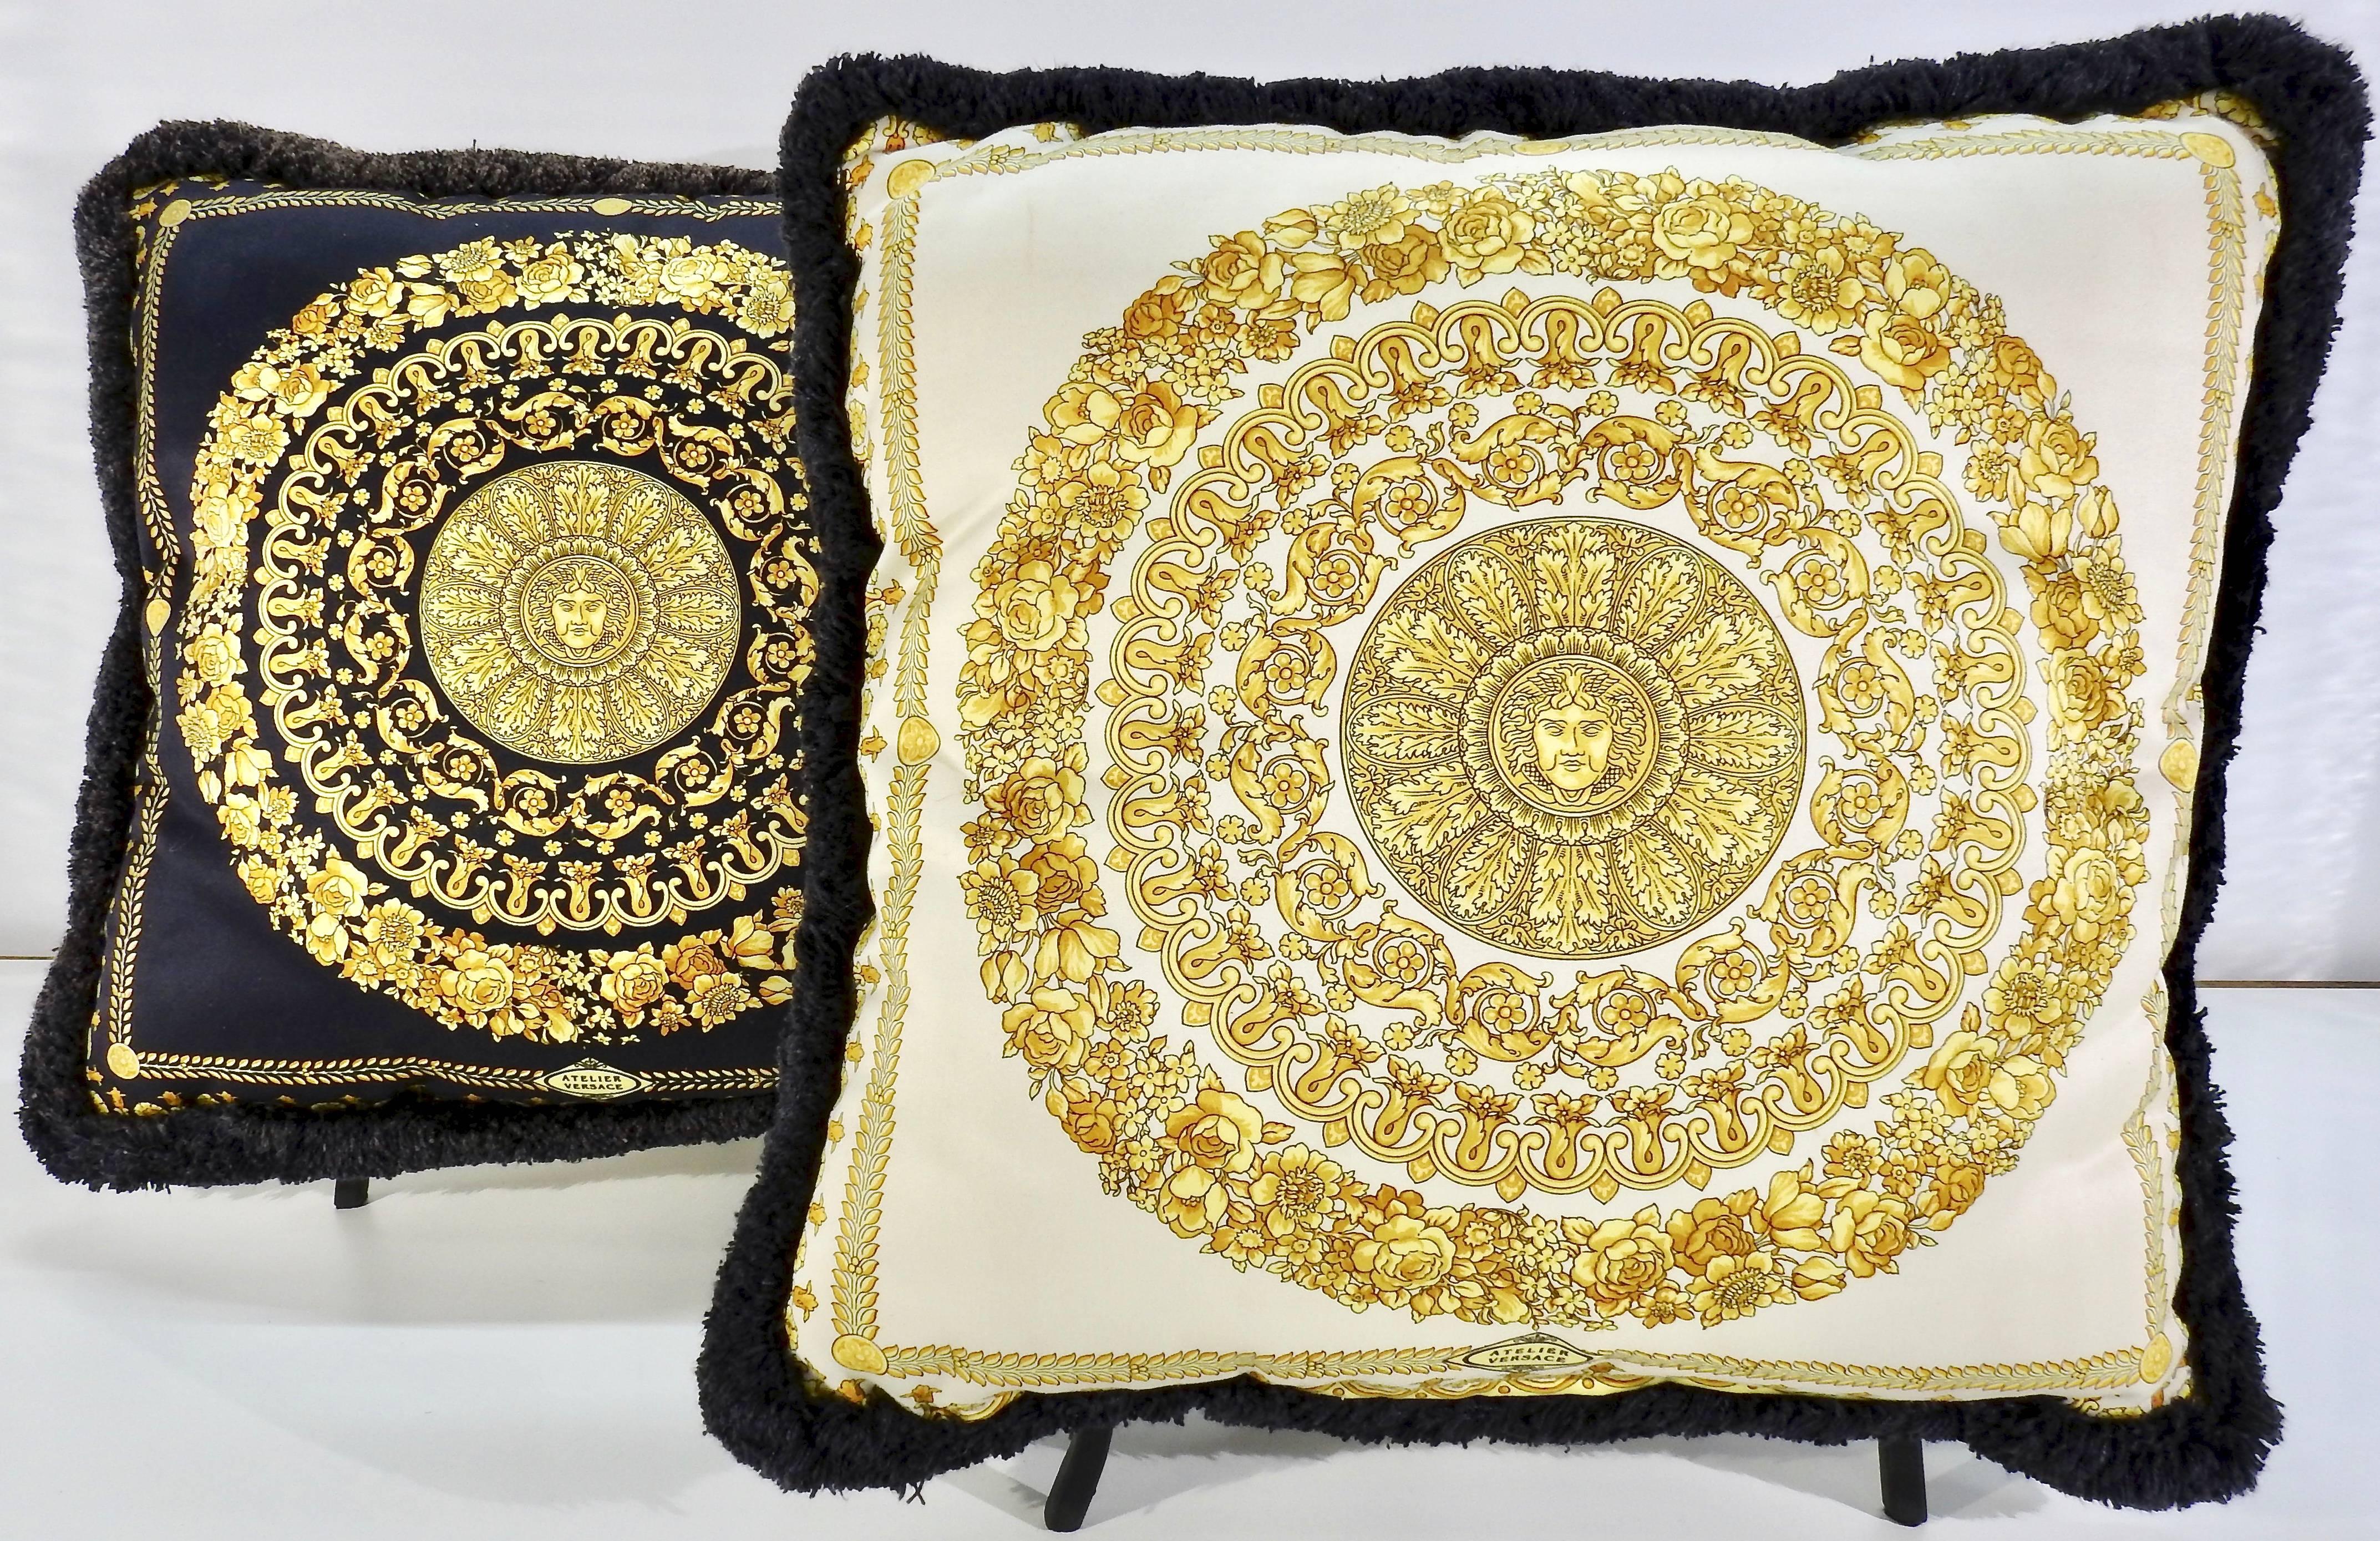 We are offering a nice pair of Atelier Versace pillows in the Medusa Royale pattern. Rich shades of gold framed by black on one side and white on the other offer you a variety of color. Rings of leaves and flowers circle the head of Medusa in the